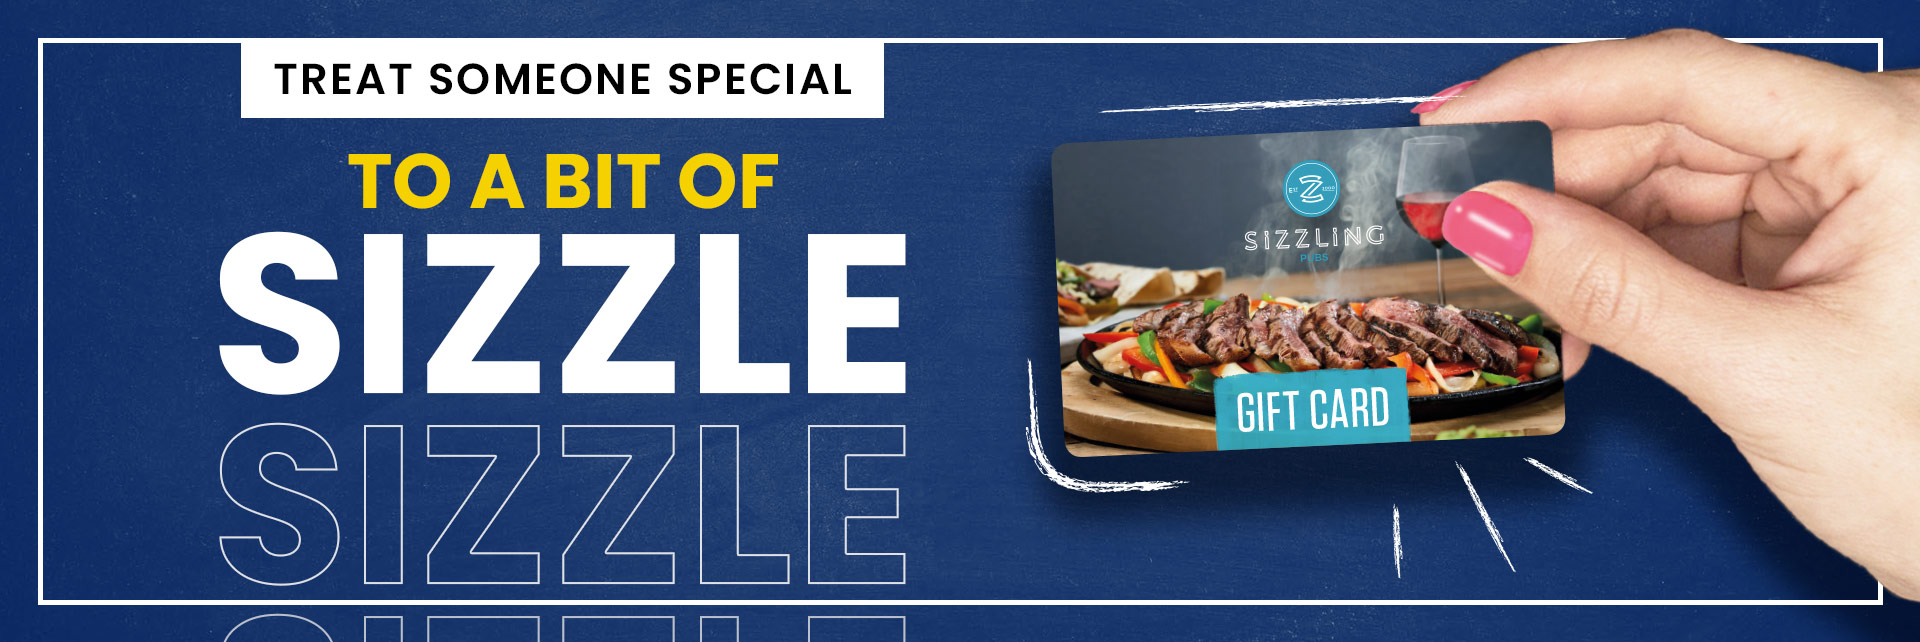 Sizzling Pubs Gift Card at The Seabridge in Newcastle-Under-Lyme